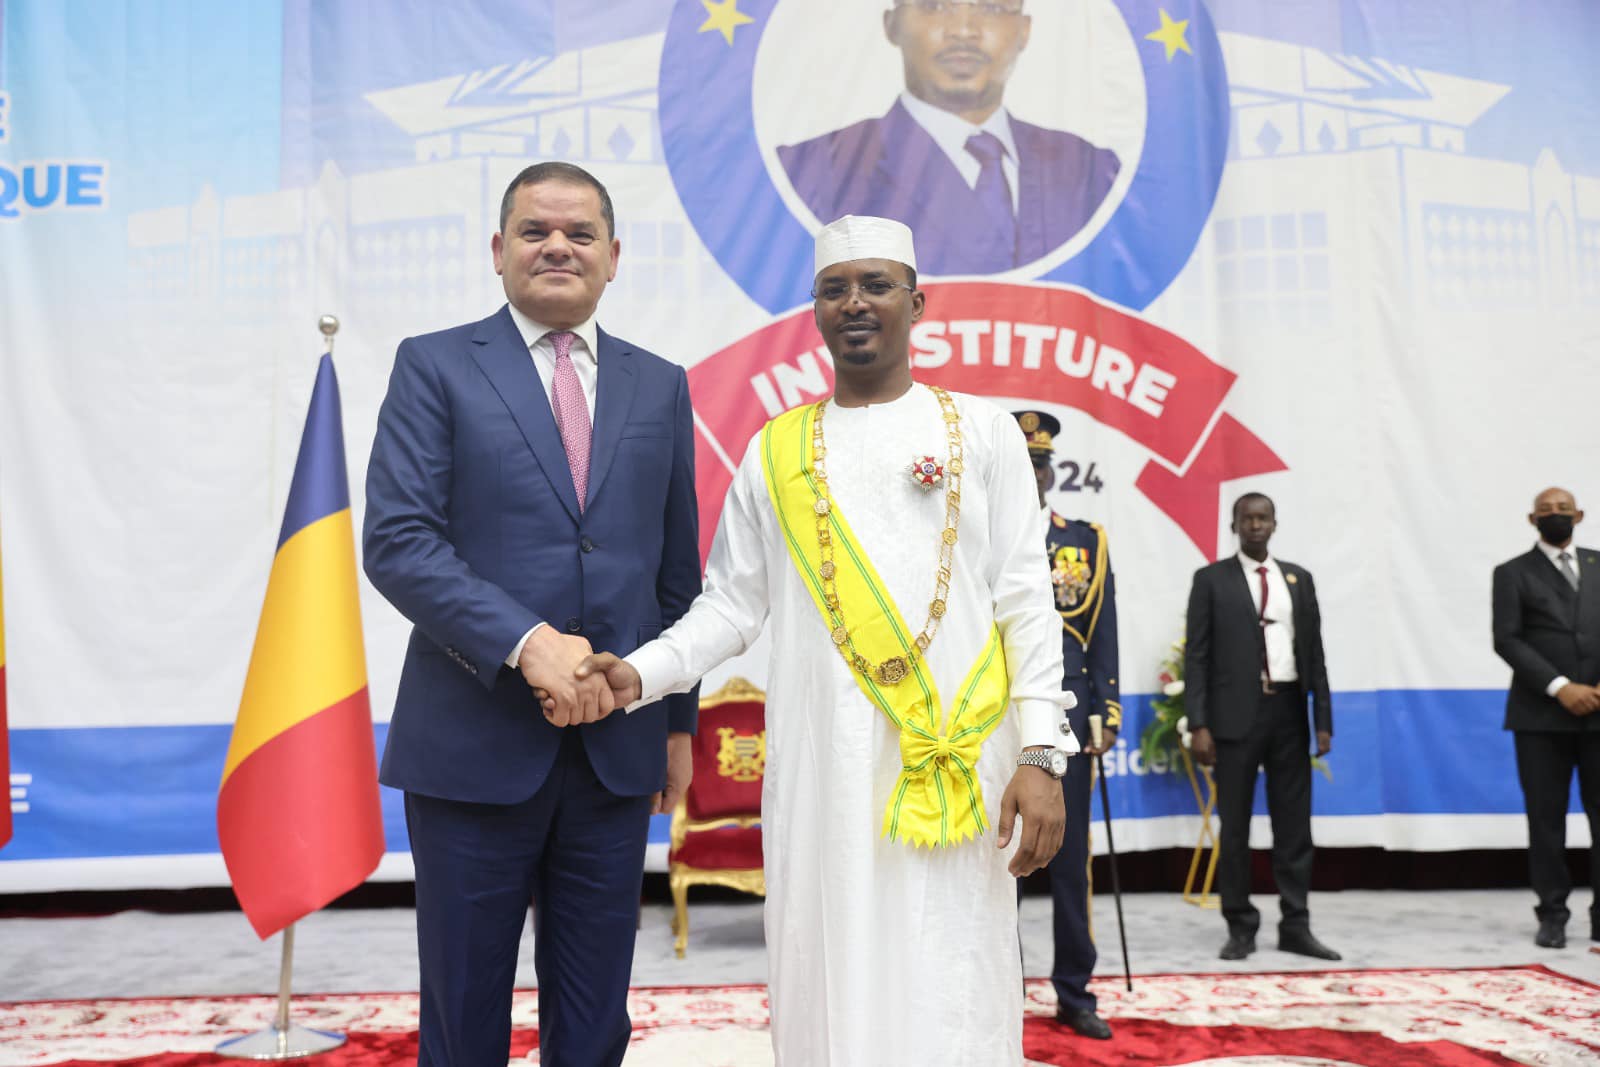 Dbaiba attends the inauguration ceremony of the President of the Republic of Chad.